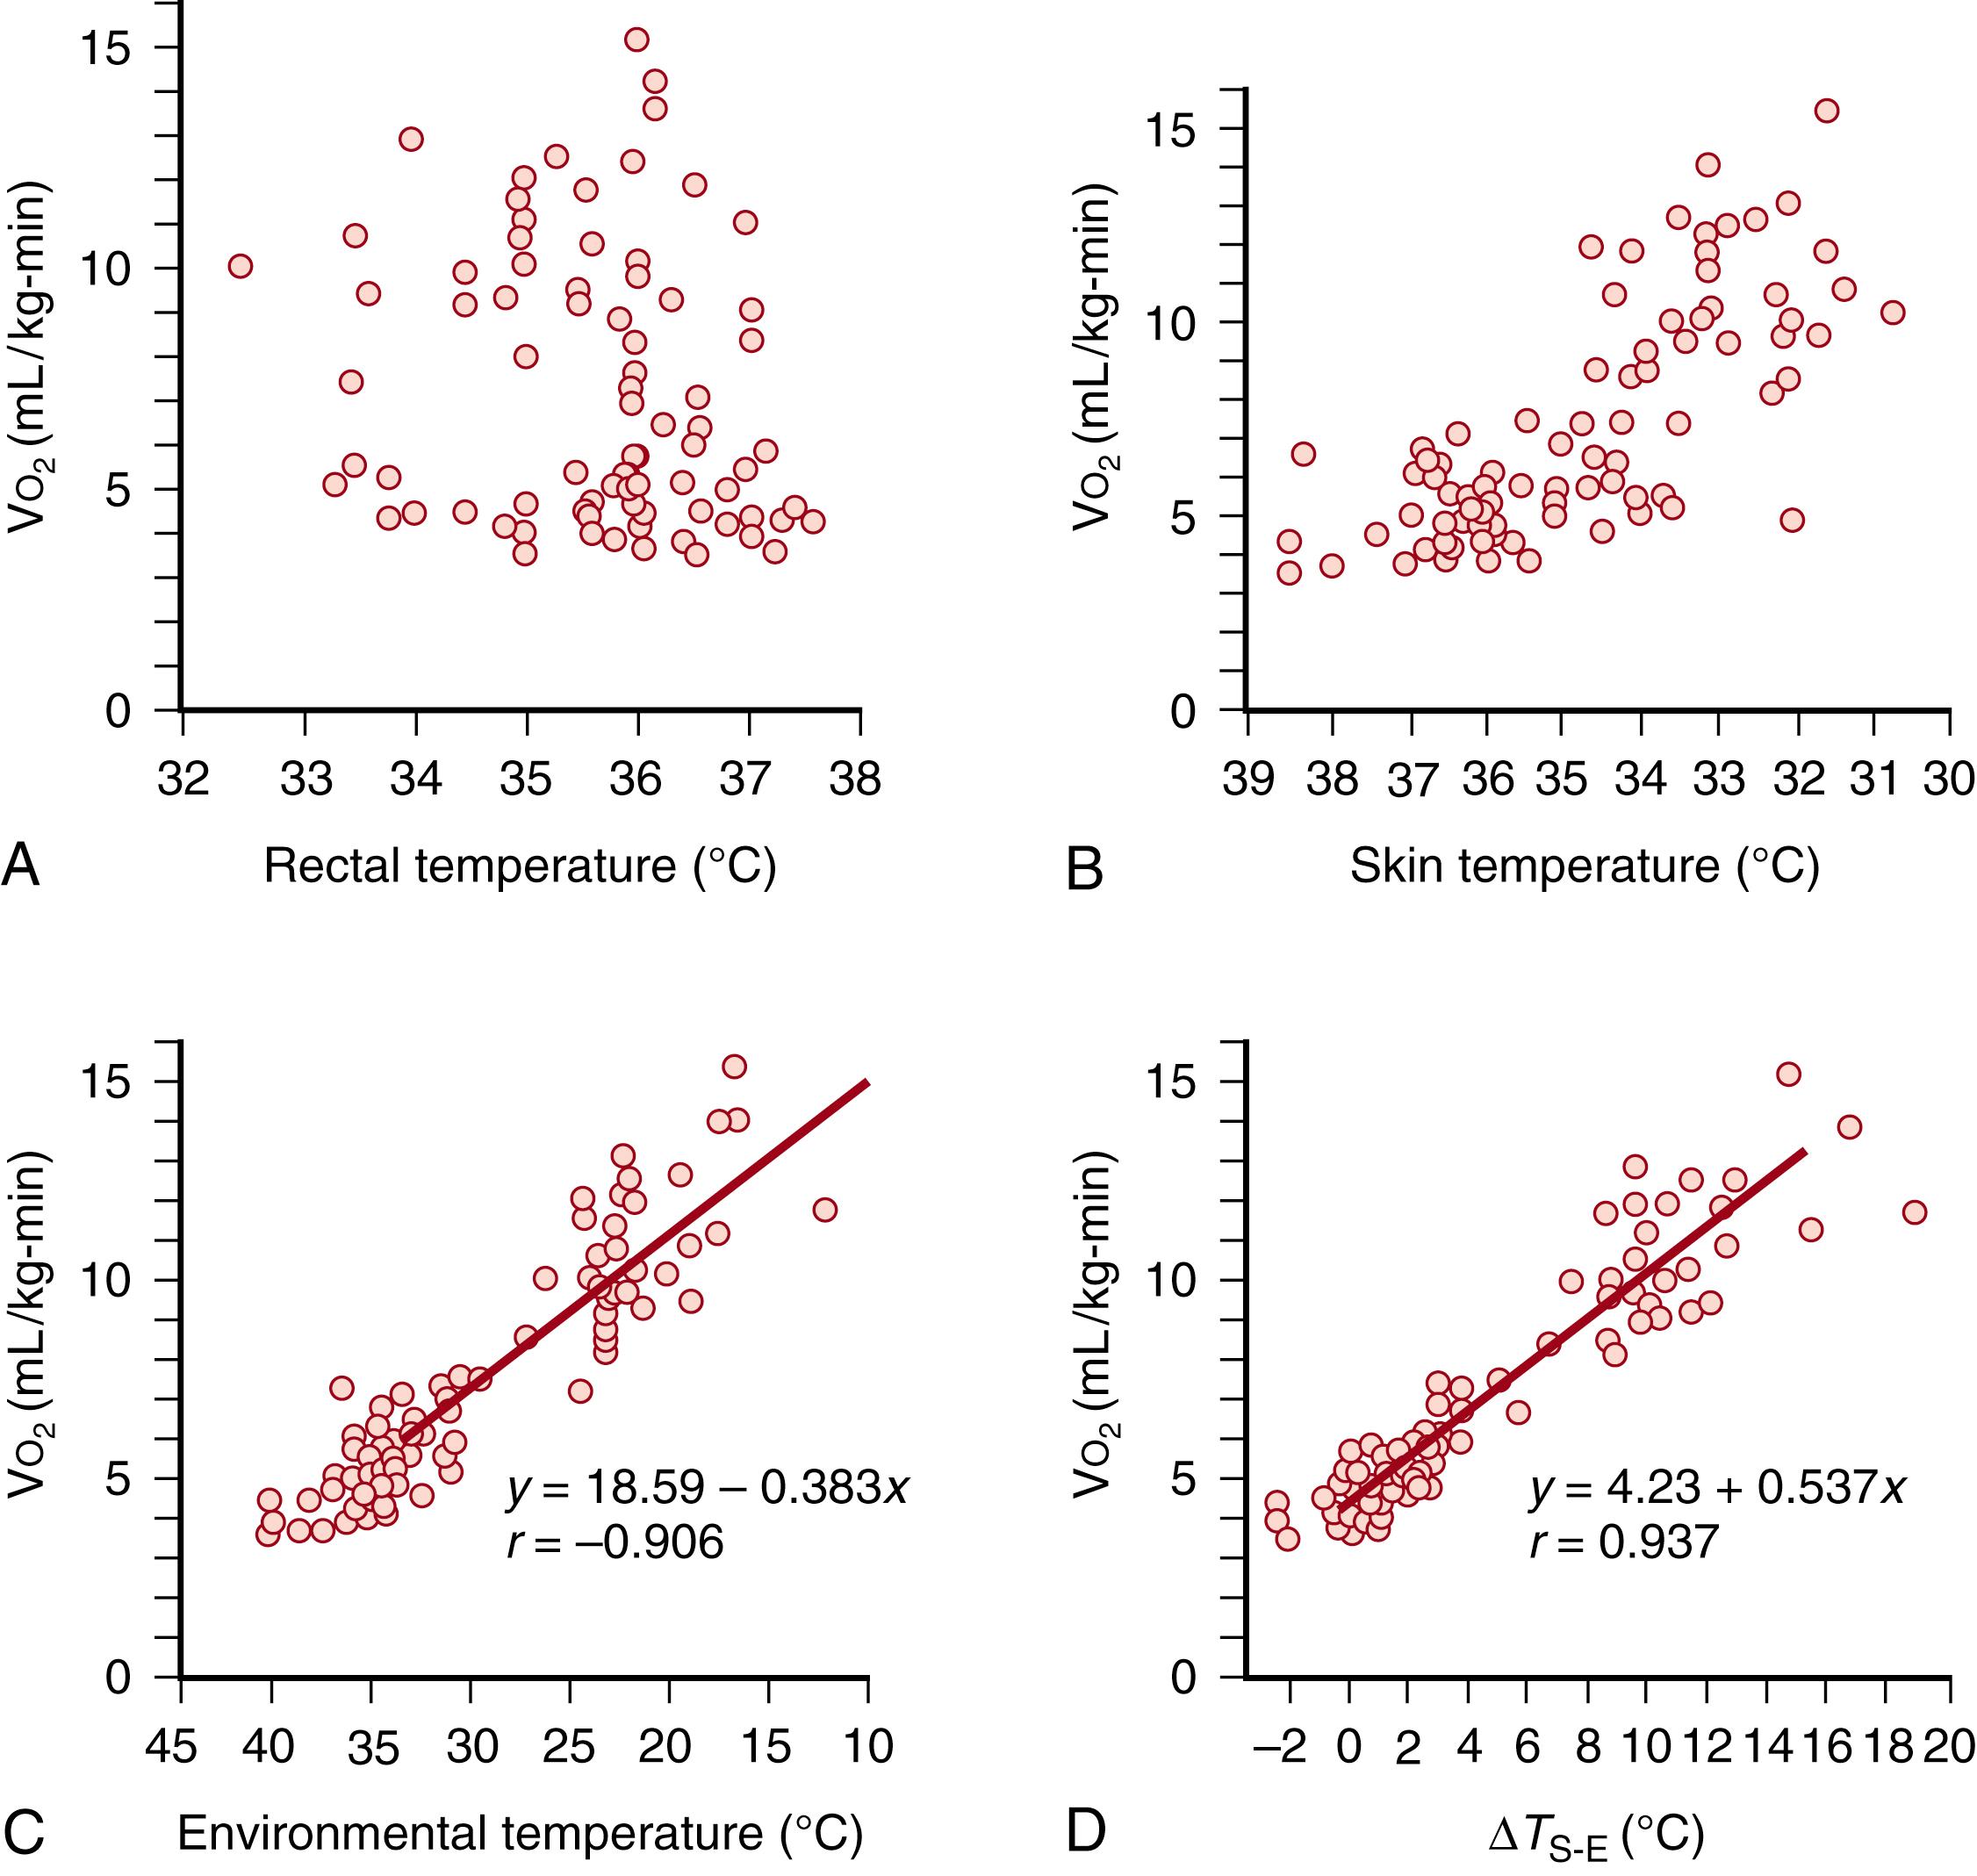 Fig. 44.6, Oxygen consumption of term newborn human infants approximately 4 hours after birth. Systemic oxygen consumption correlates best with the skin-environment gradient (D), indicating the importance of peripheral heat flux in regulating body temperature in neonates rather than core temperature (A).